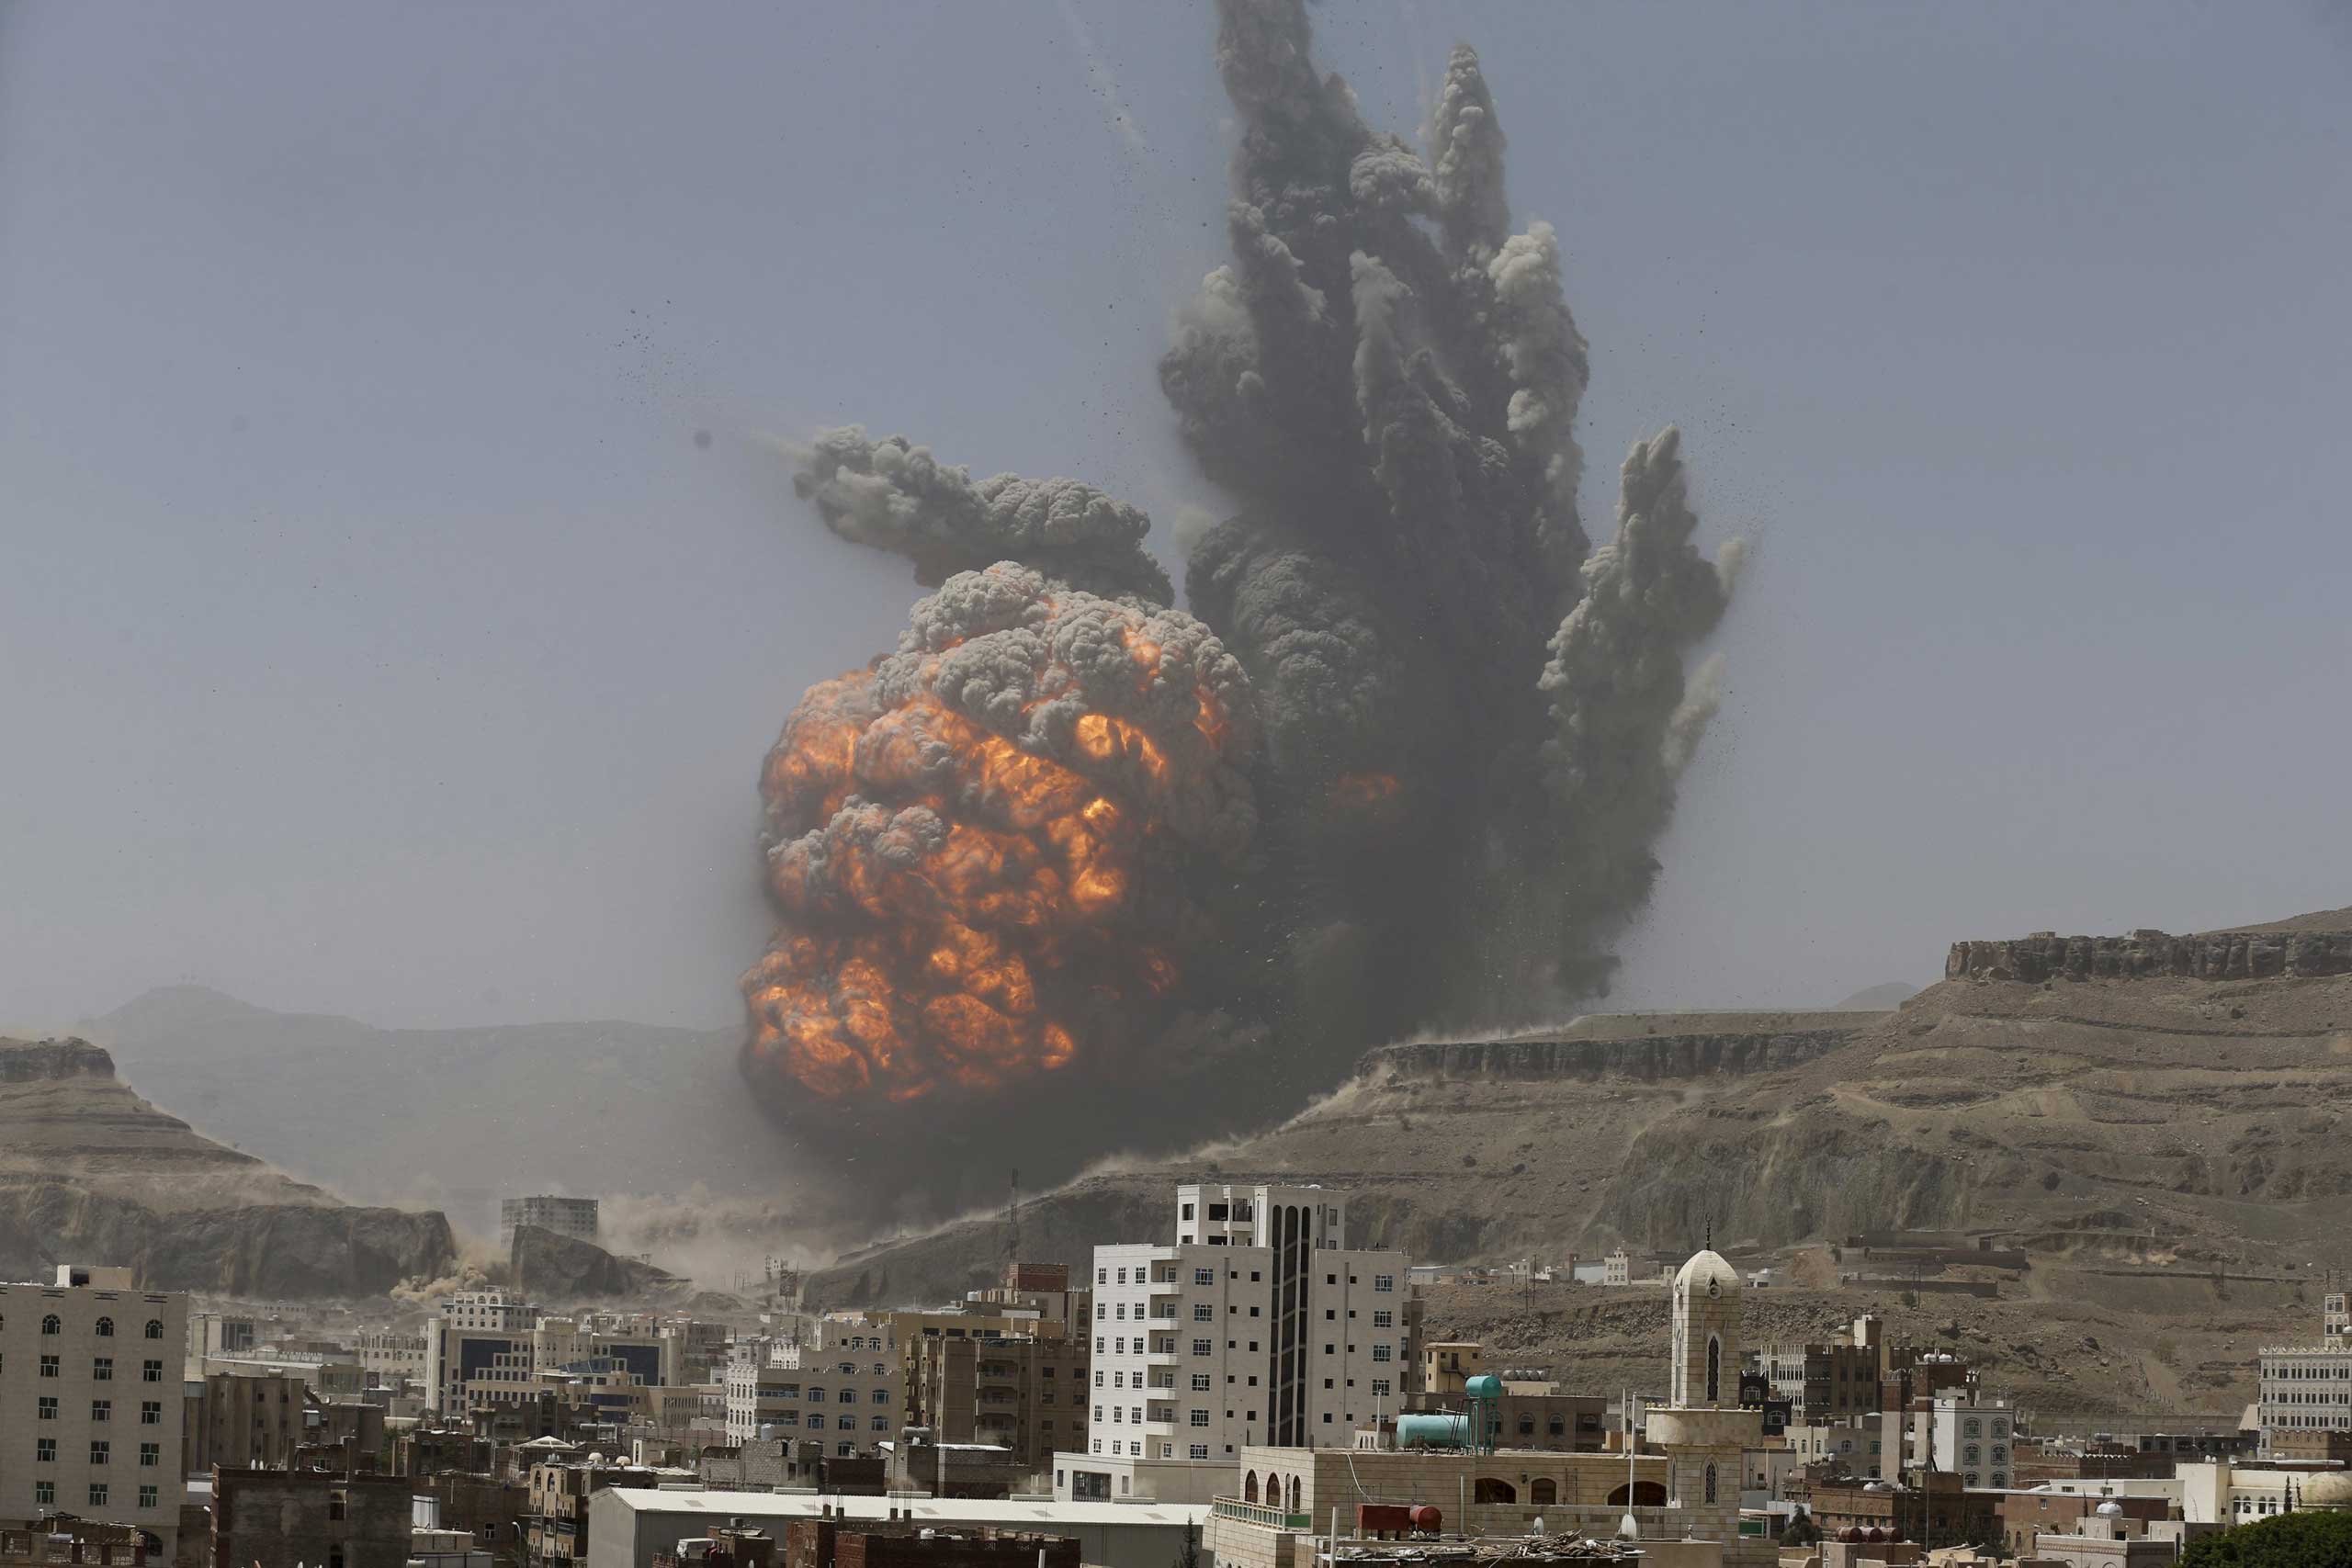 Smoke rises during an air strike on an army weapons depot on a mountain overlooking Yemen's capital Sanaa April 20, 2015.